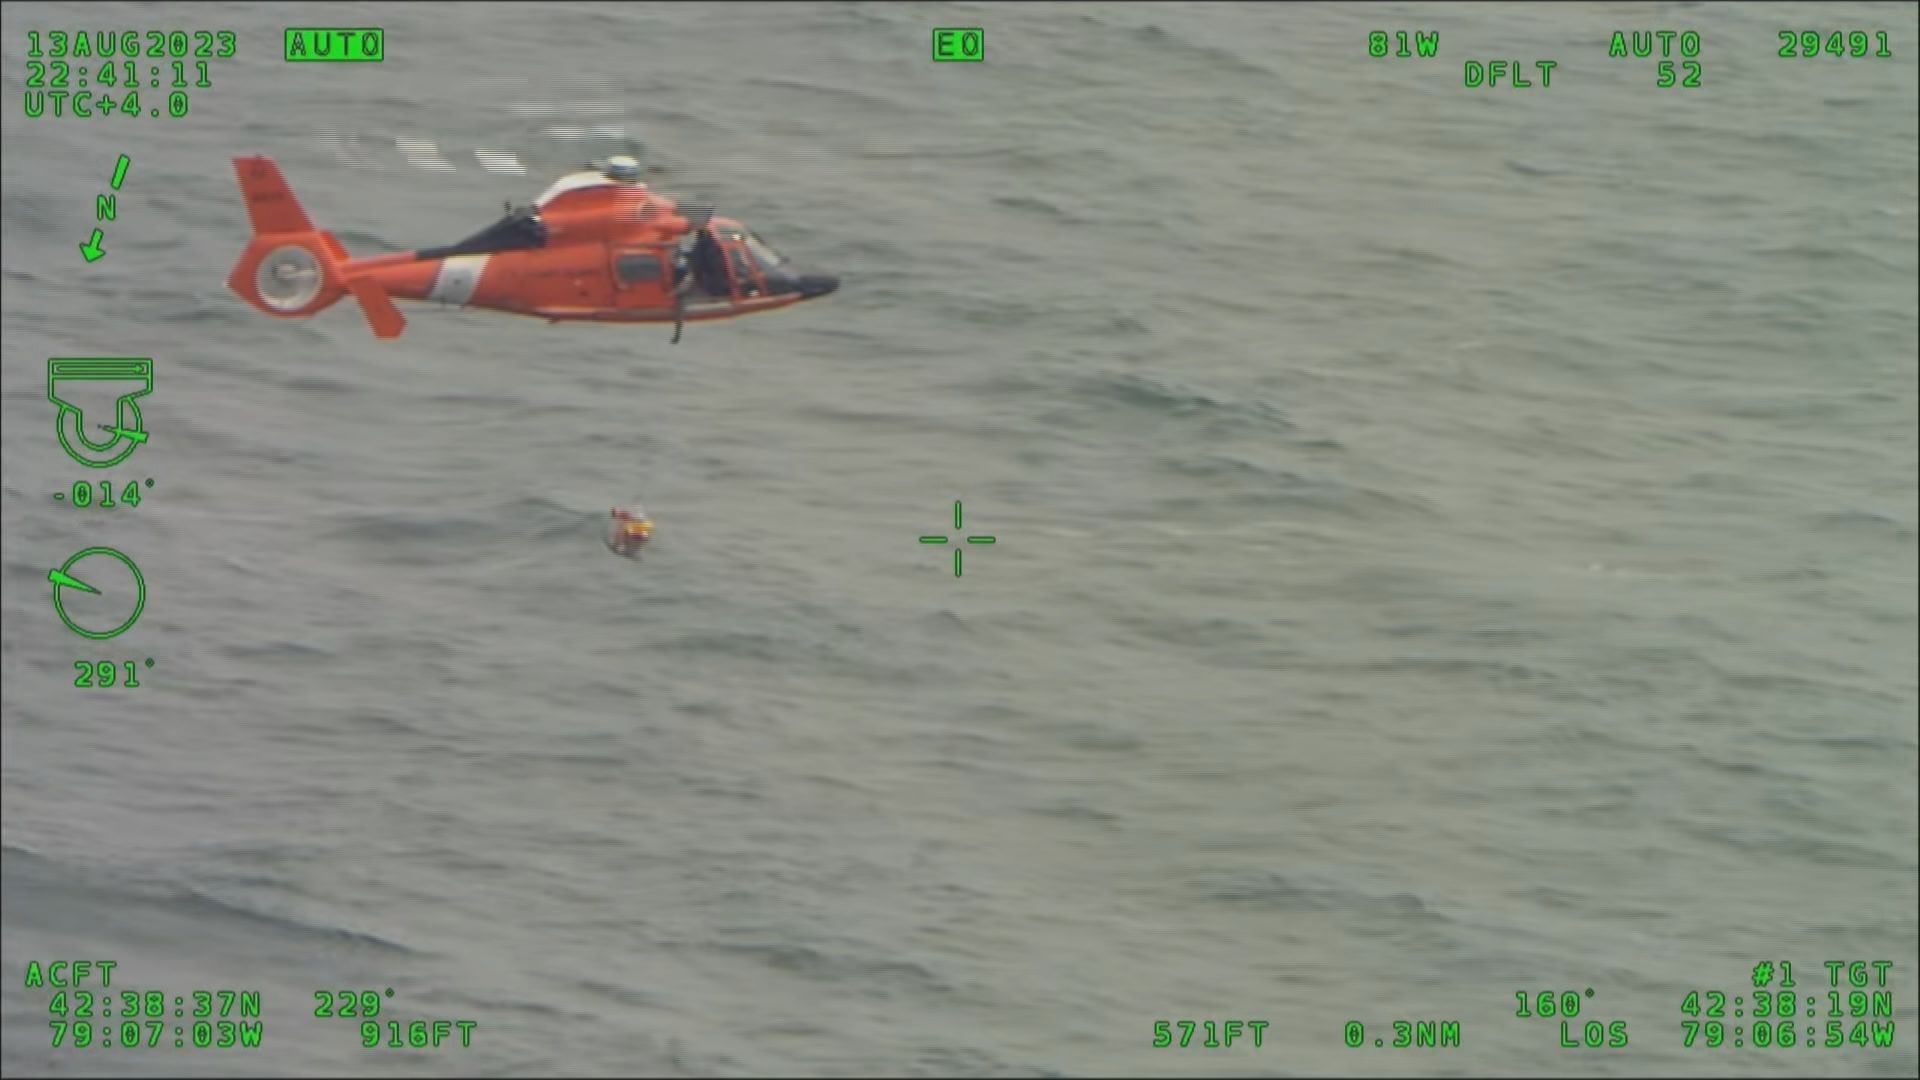 US Coast Guard, Erie County Sheriff's Office rescue boaters from capsized catamaran